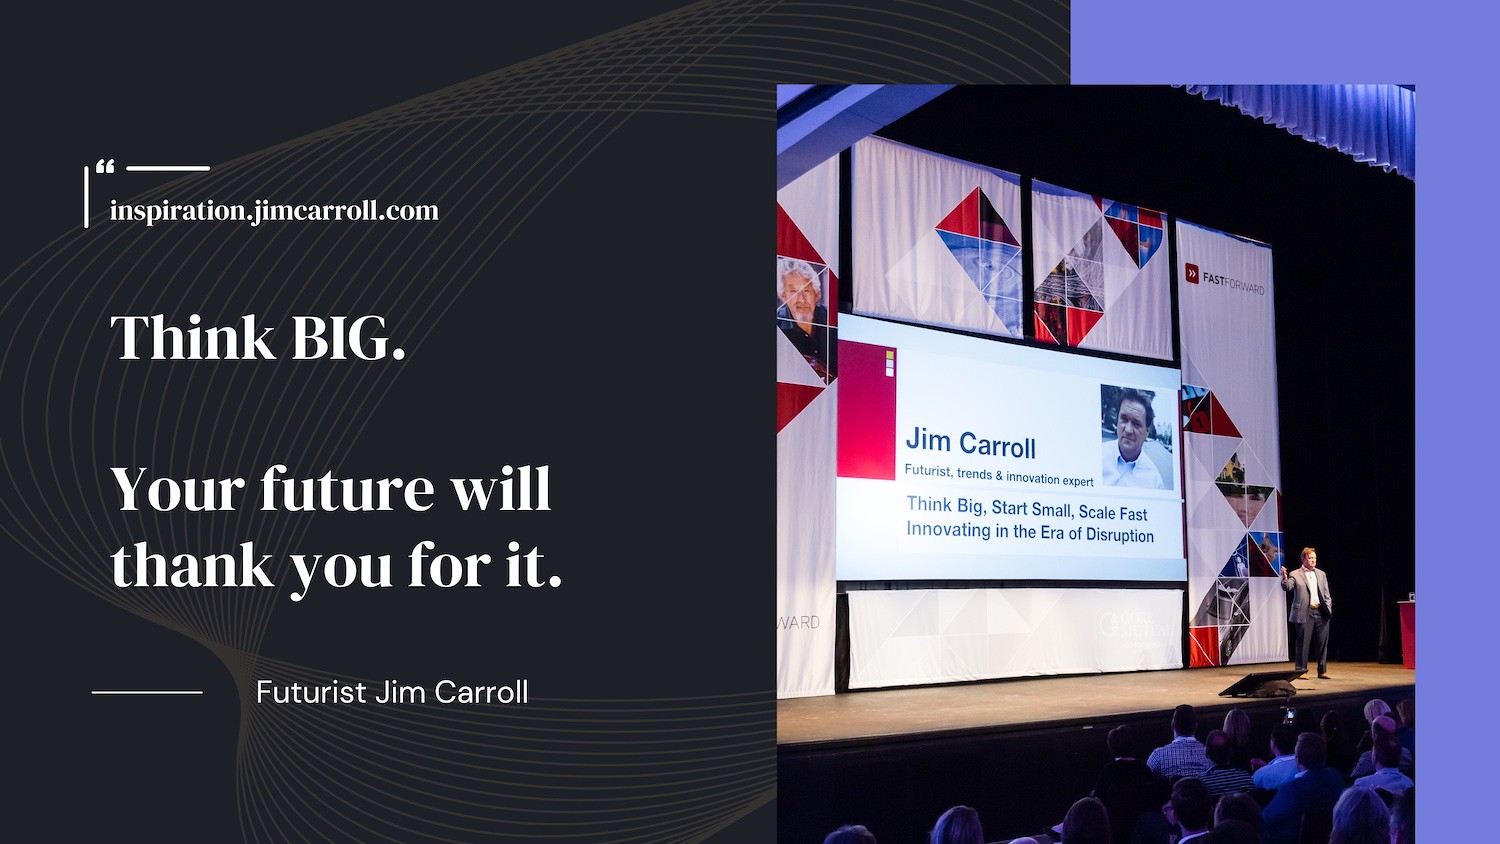 "Think BIG. Your future will thank you for it." - Futurist Jim Carroll